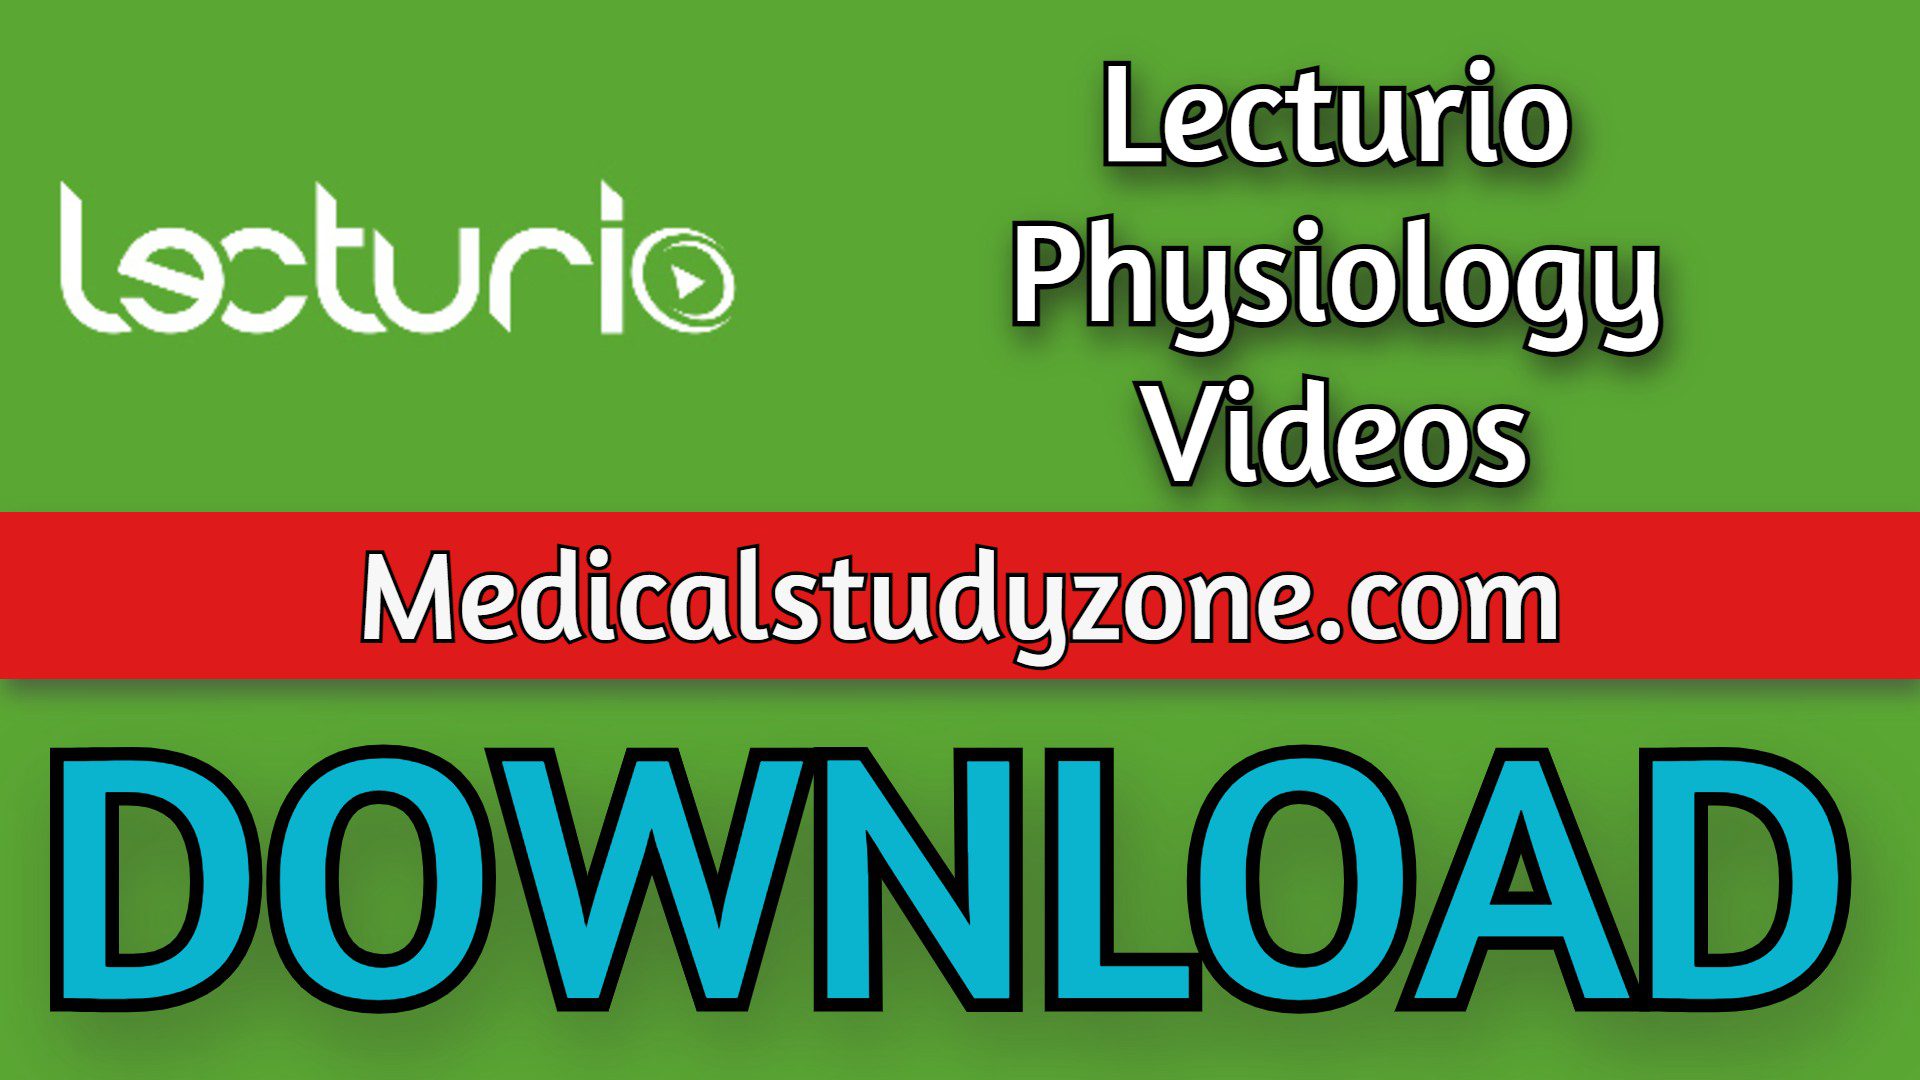 Lecturio Physiology Videos 2021 Free Download